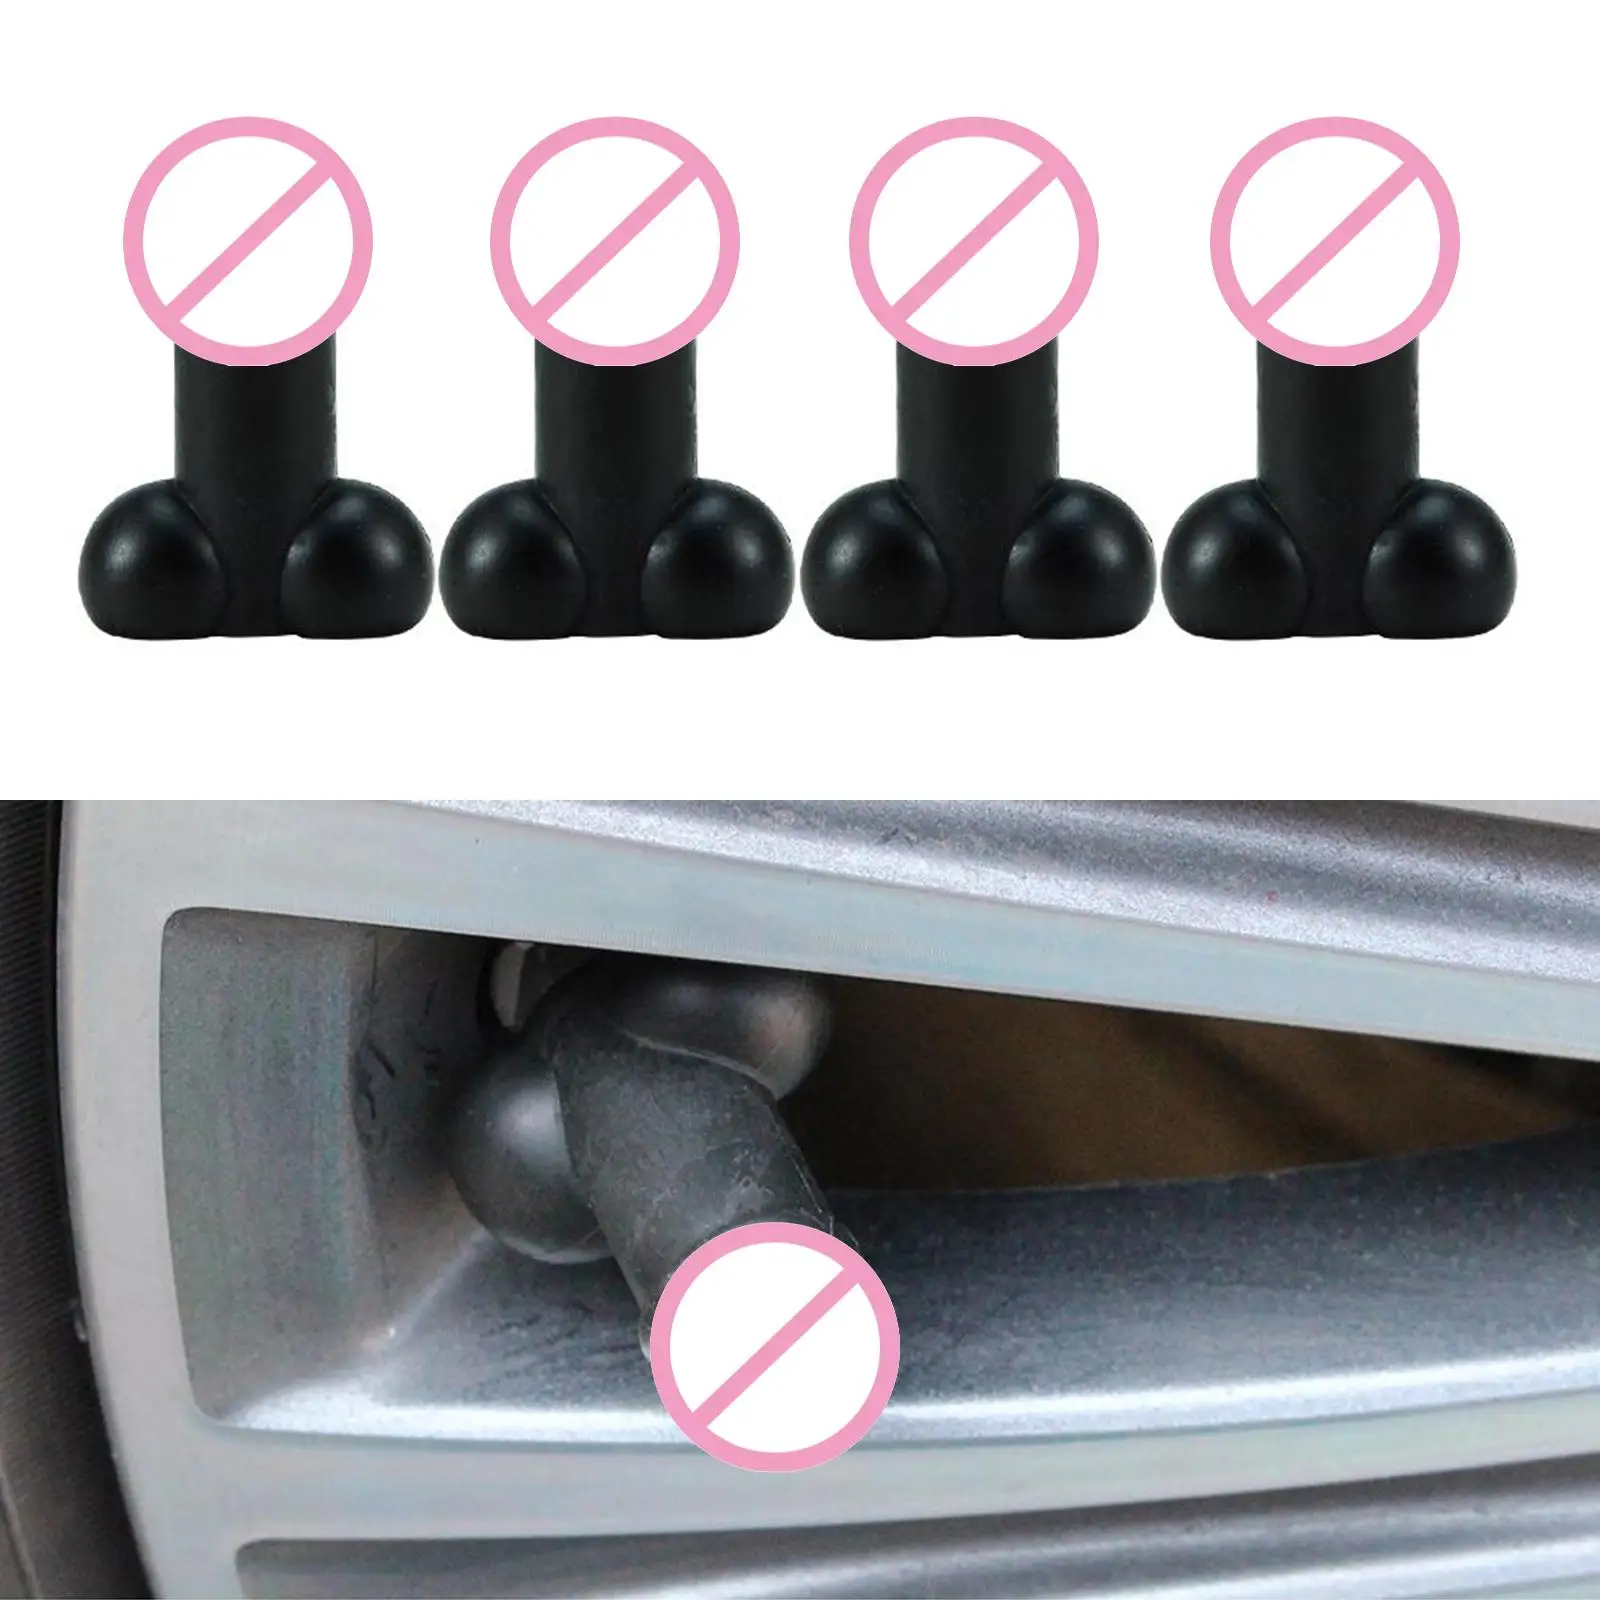 2x 4 Pack Car Motorcycles   Tyre Tire Valve Stem , Glowing in The Dark, Easy to Use